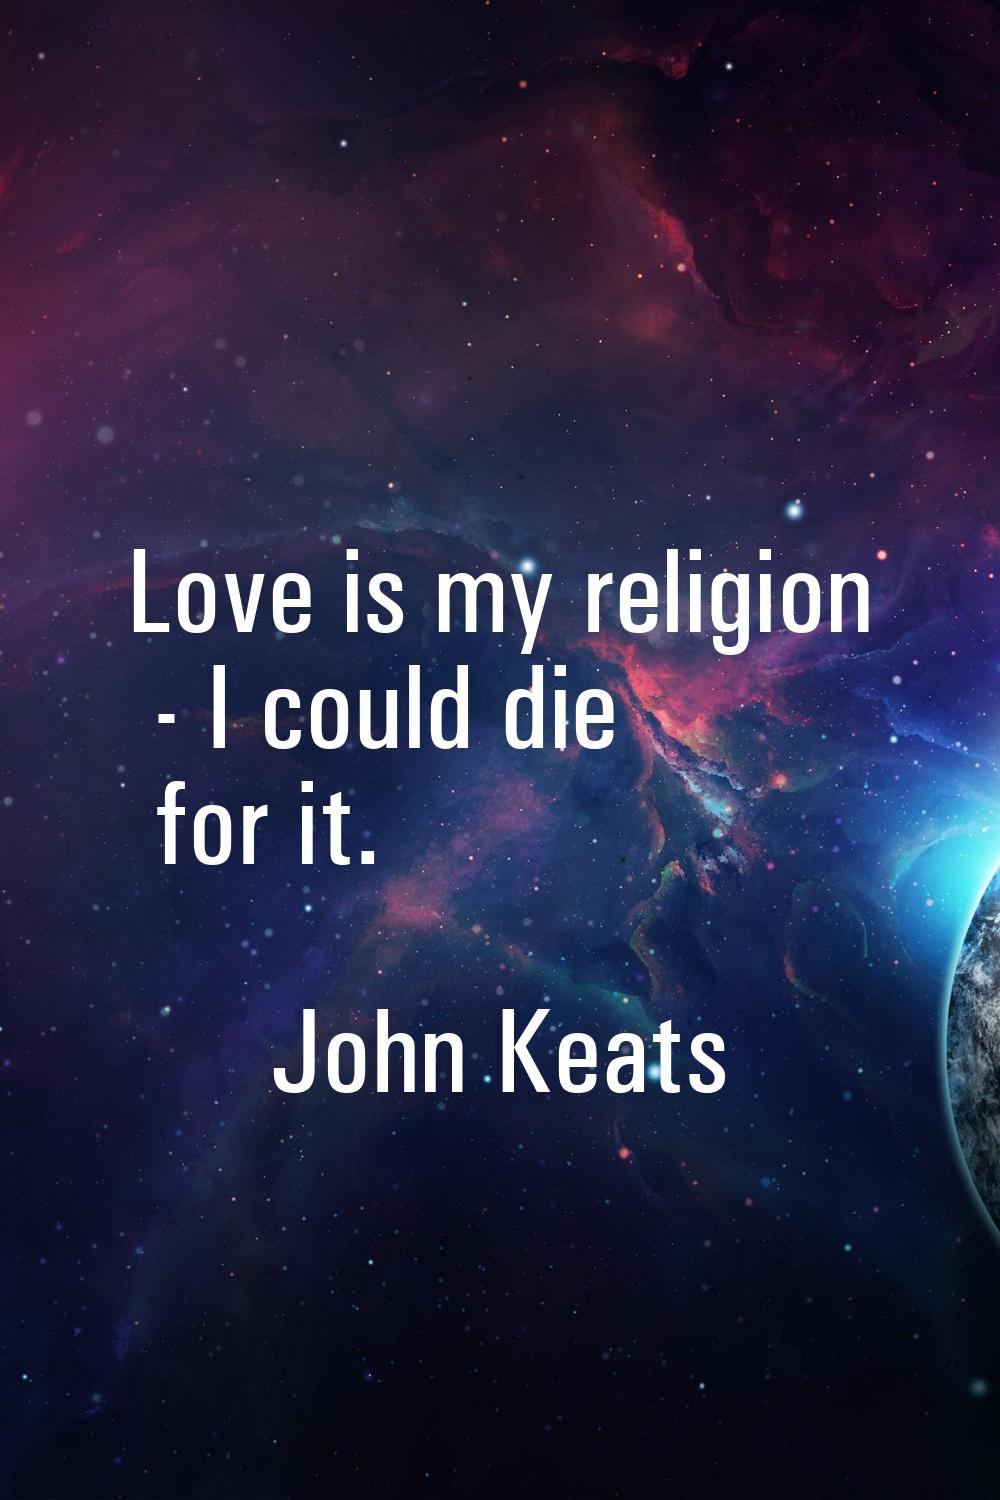 Love is my religion - I could die for it.